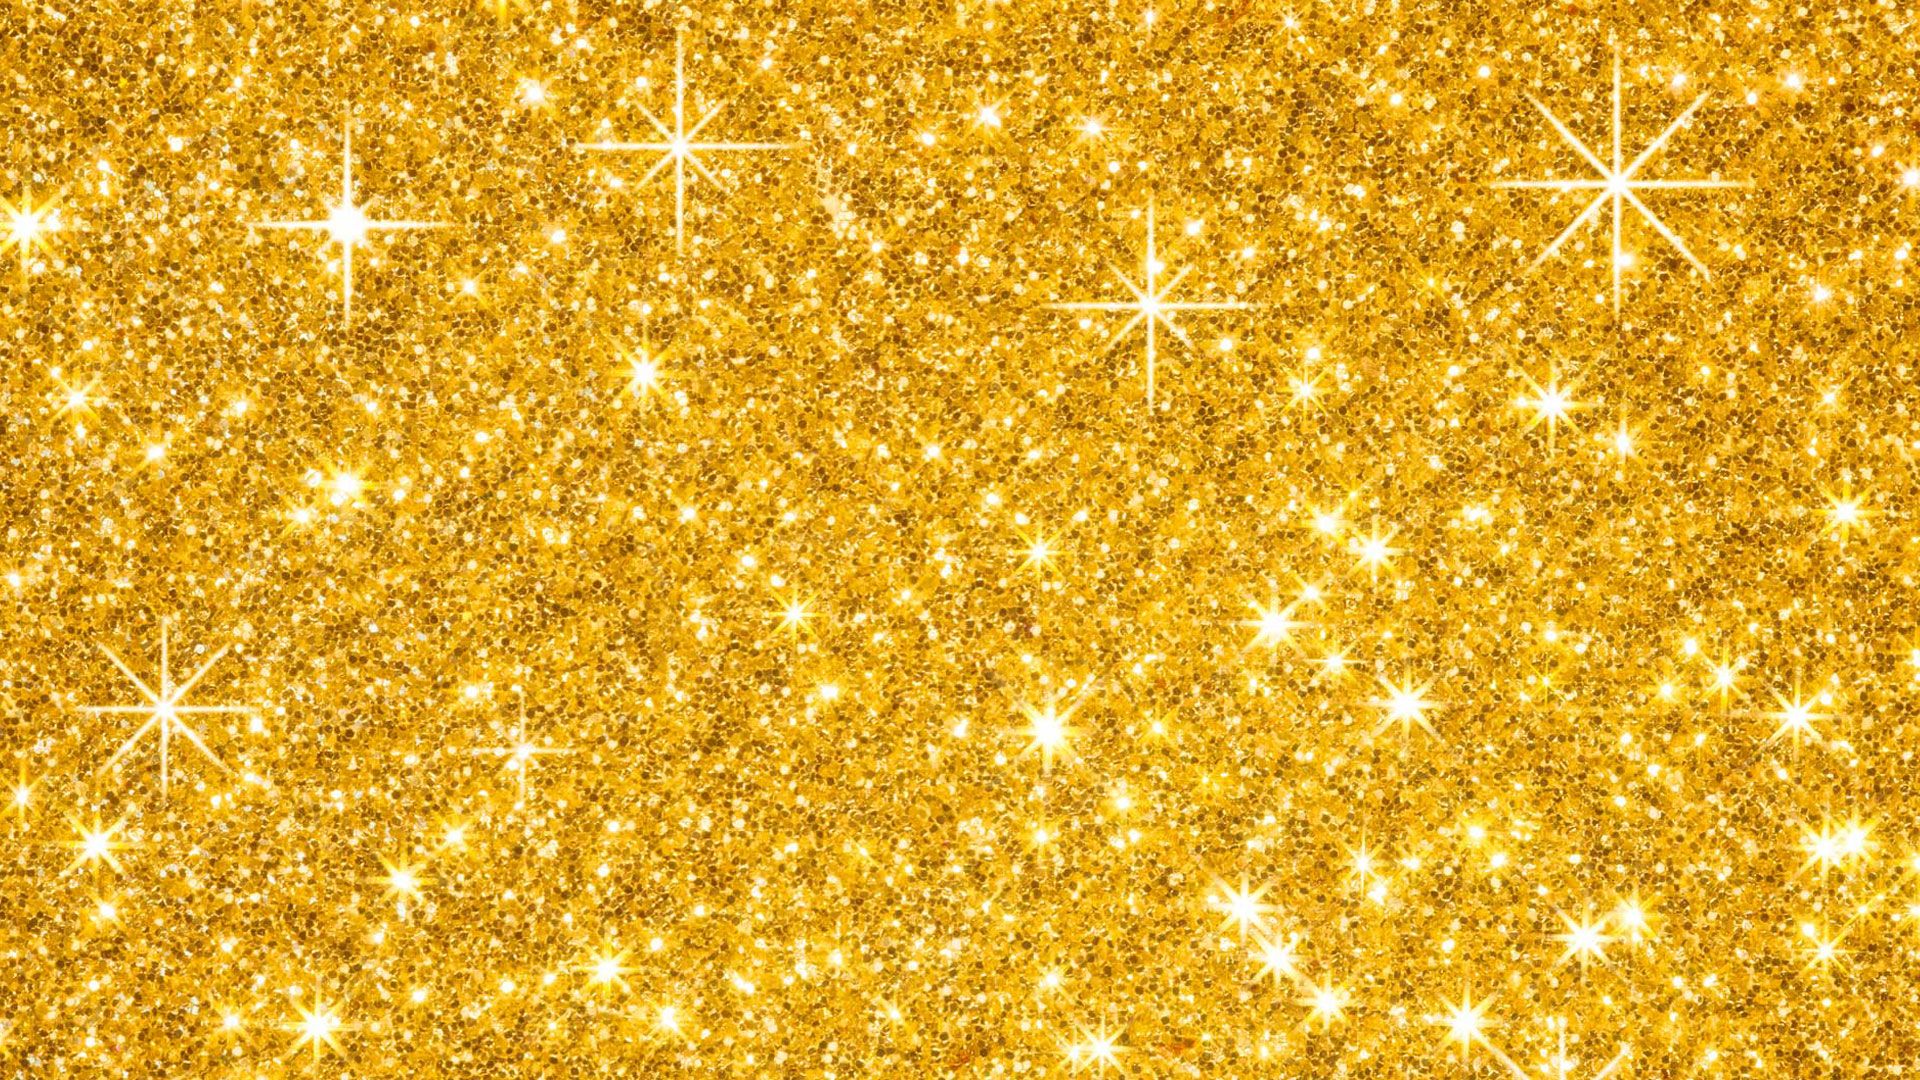 Gold Glitter 1080p Background Picture Image